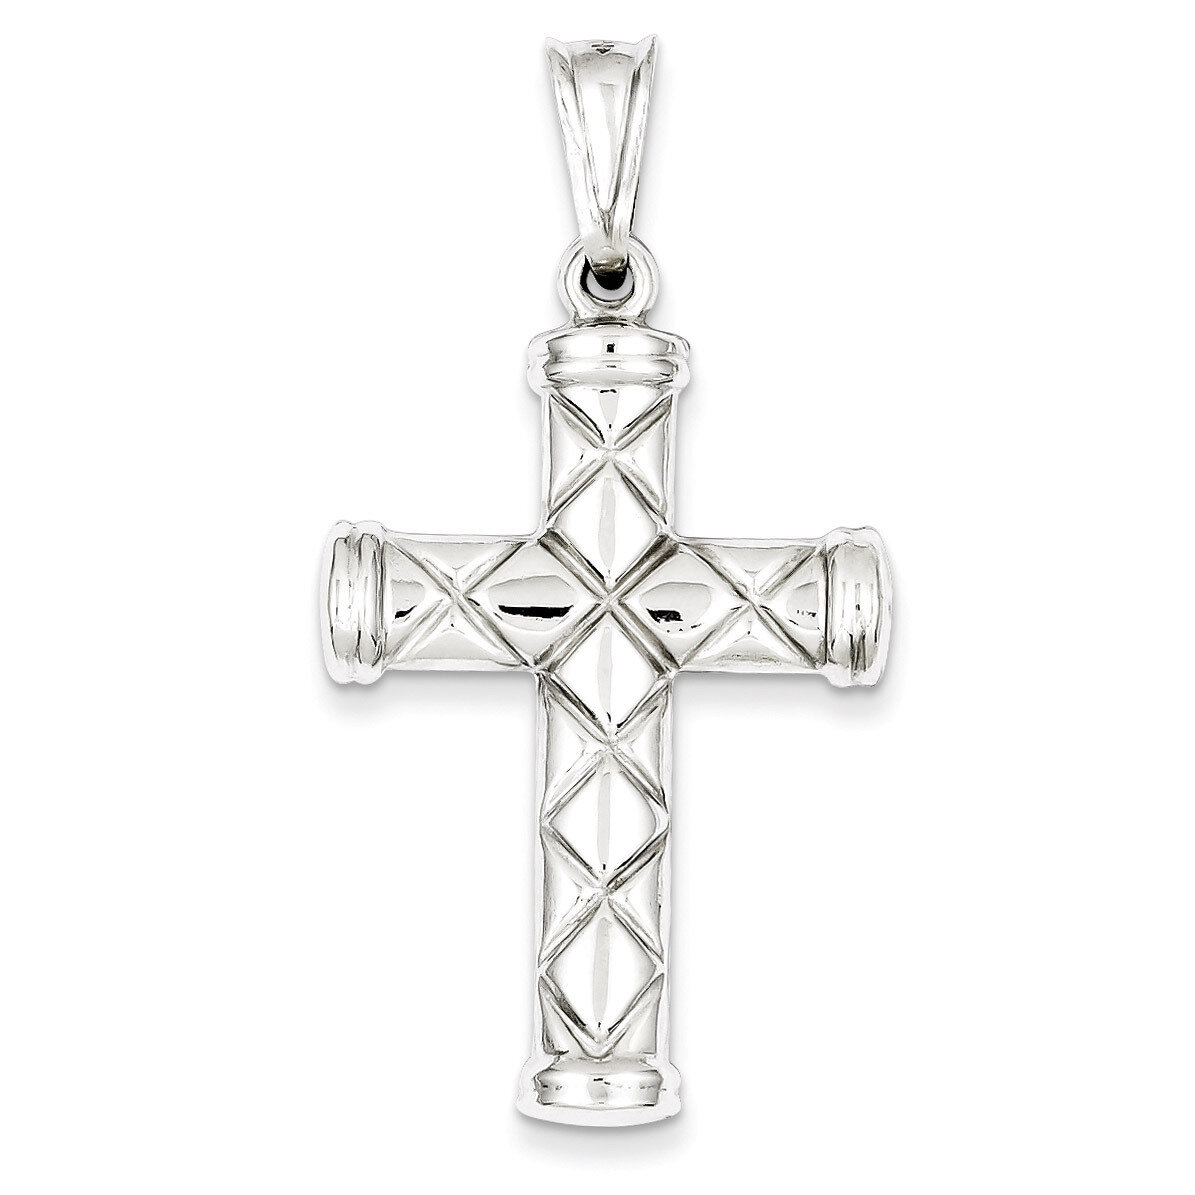 Latin Cross Pendant Sterling Silver Rhodium-plated Hollow QC5416